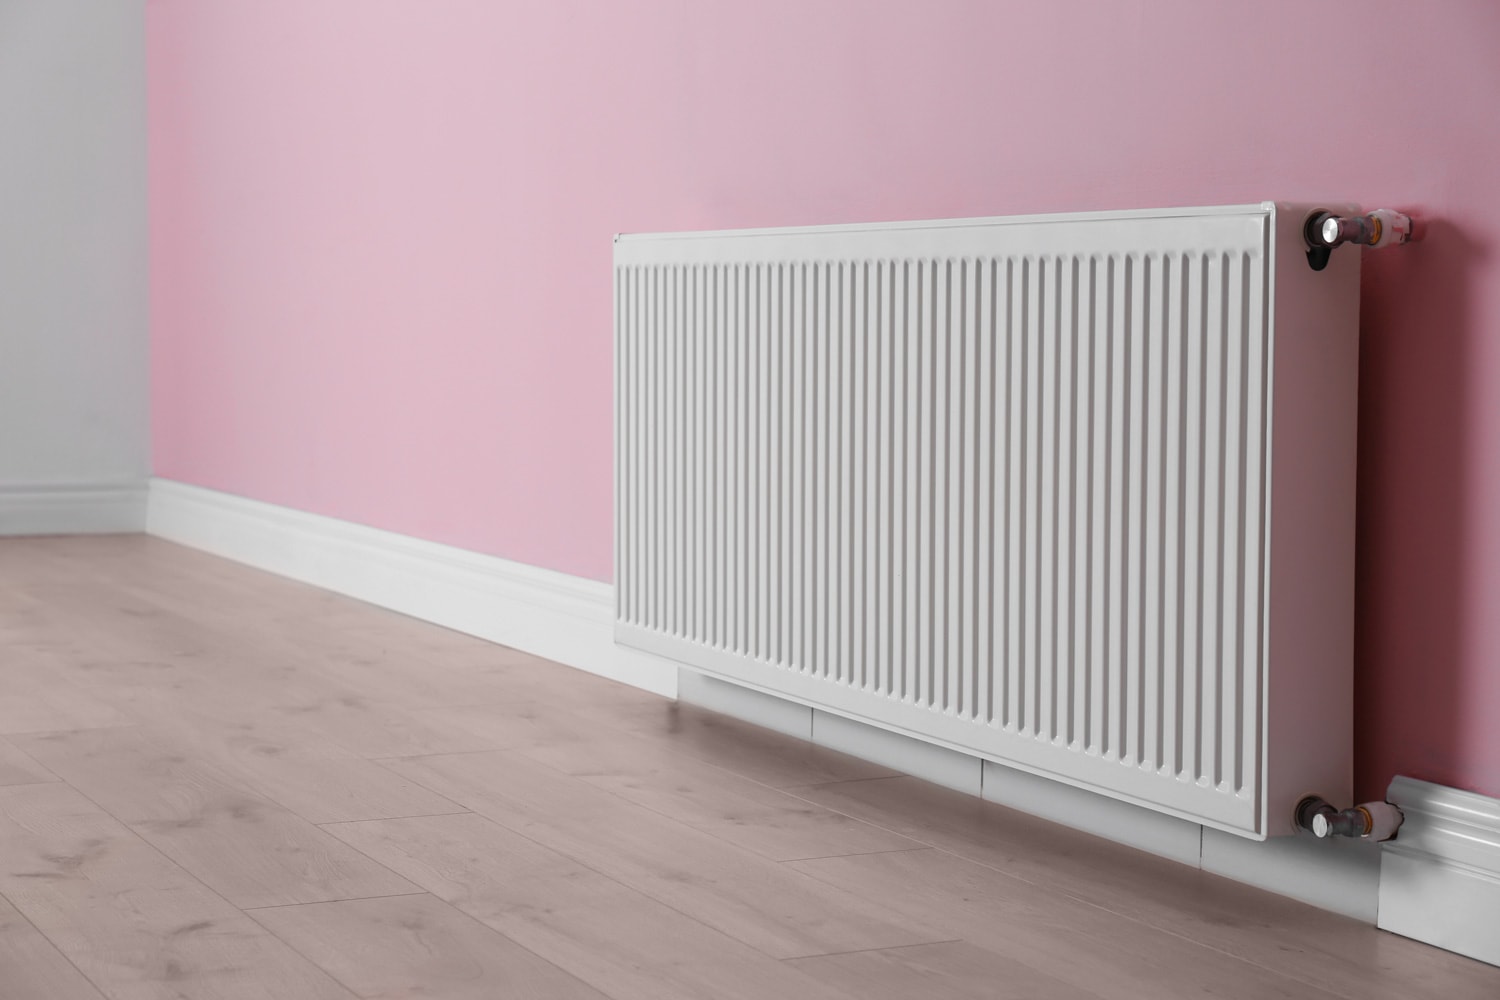 Modern radiator on color wall indoors. Central heating system